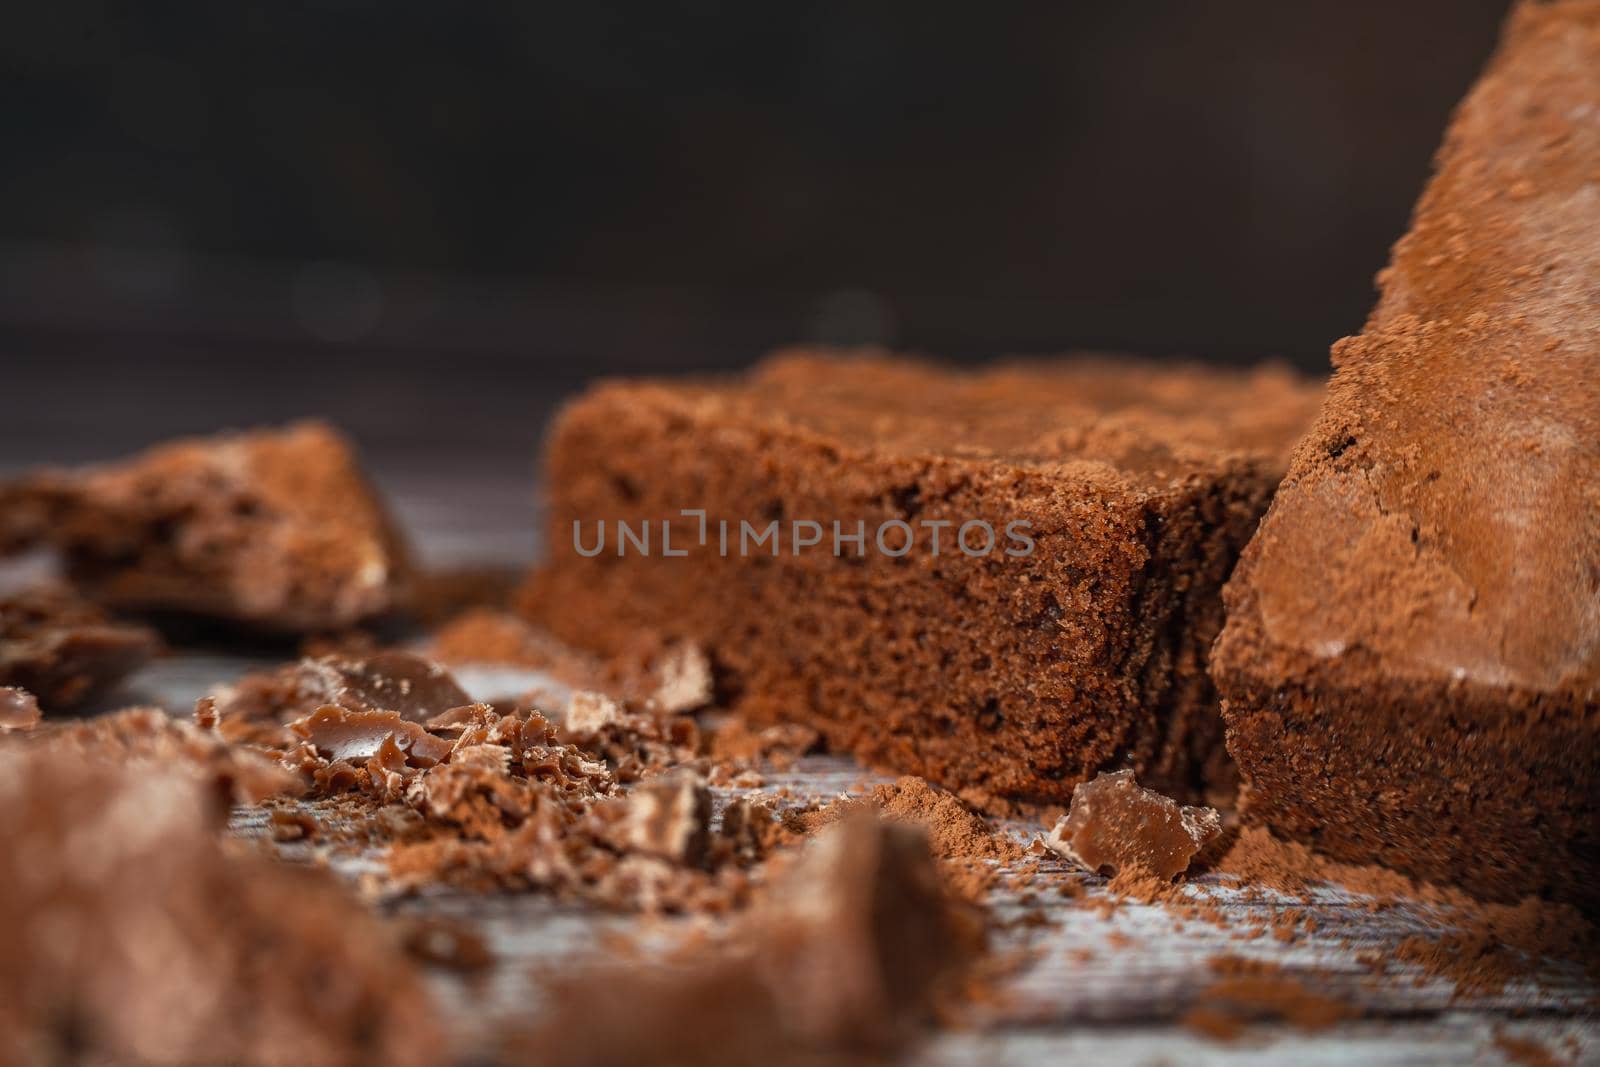 Close up of a Chocolate brownies on a rustic wooden table with chocolate chips and chocolate soil next to the brownie portions.